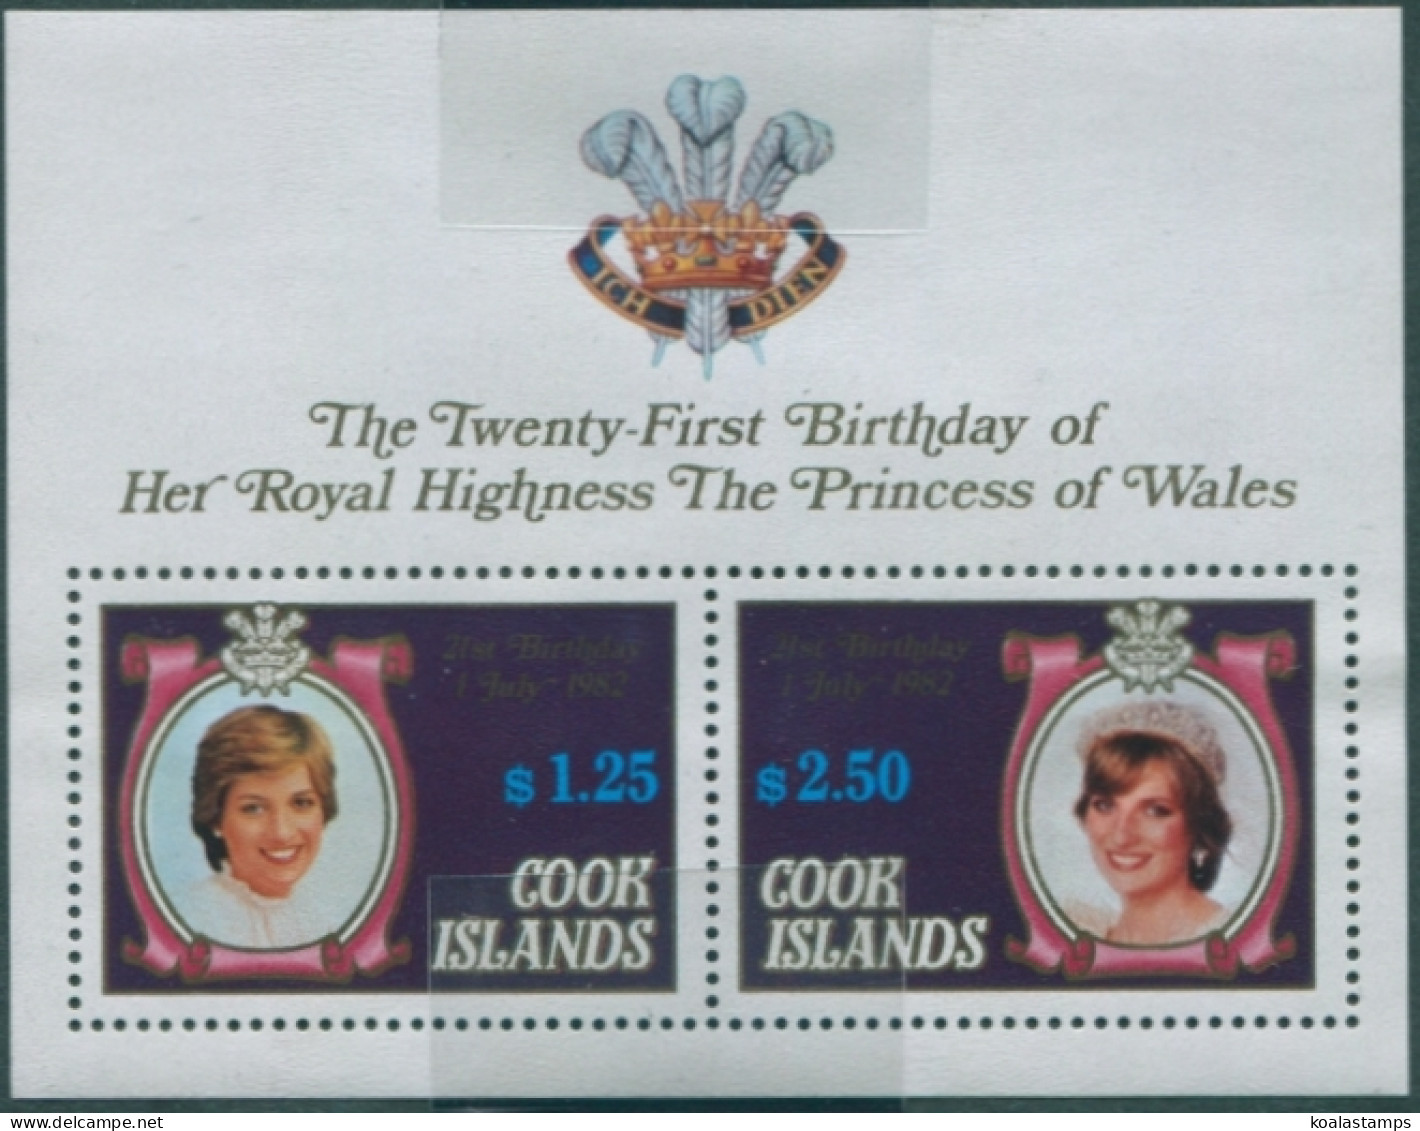 Cook Islands 1982 SG837 Princess Of Wales Birthday MS MNH - Cook Islands